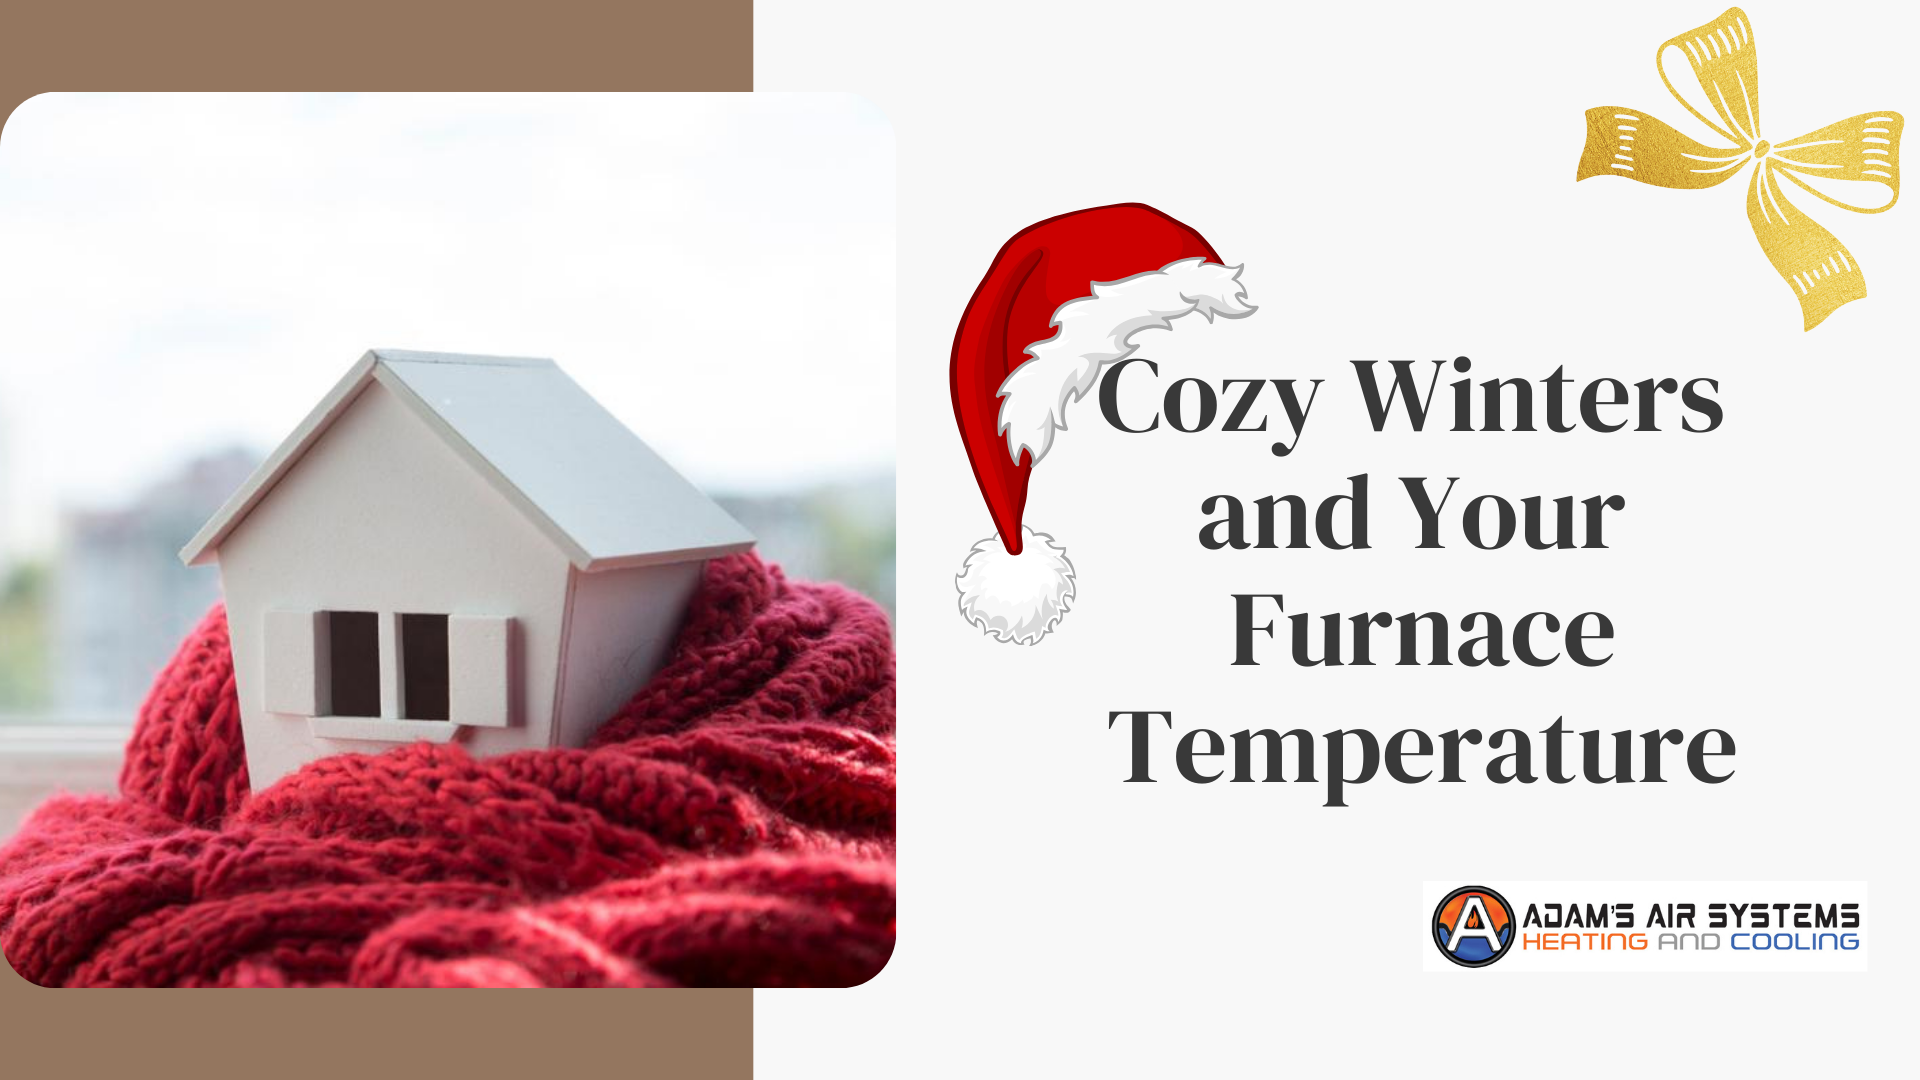 an ad for adams air systems says cozy winters and your furnace temperature